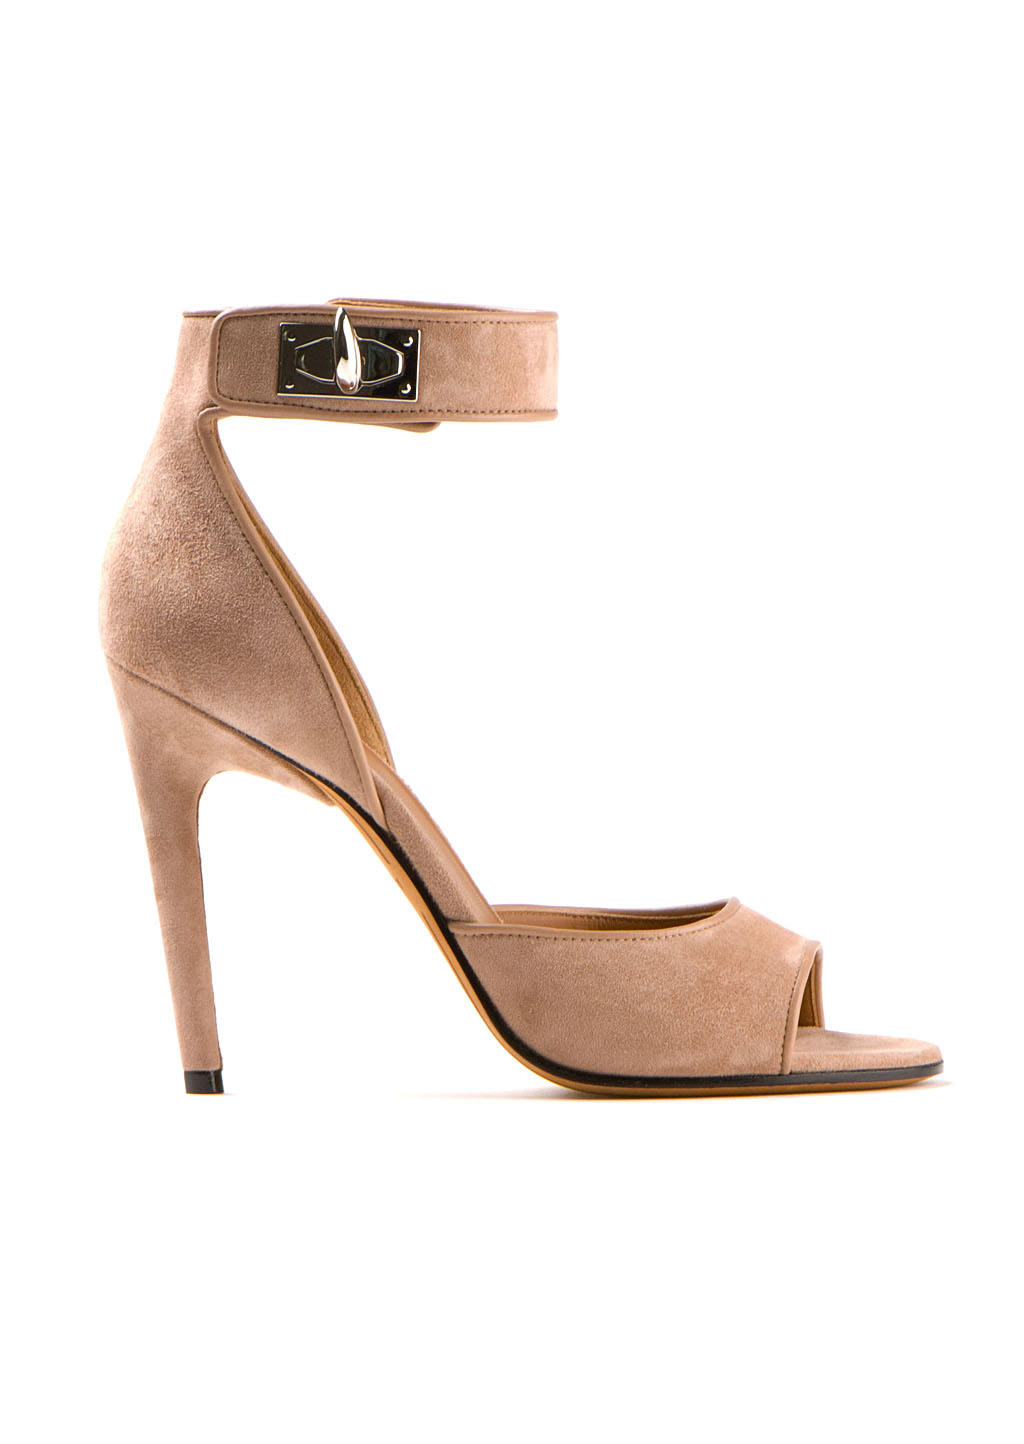 Givenchy Rosewood Velvet Leather High Heeled Sandals in Brown | Lyst